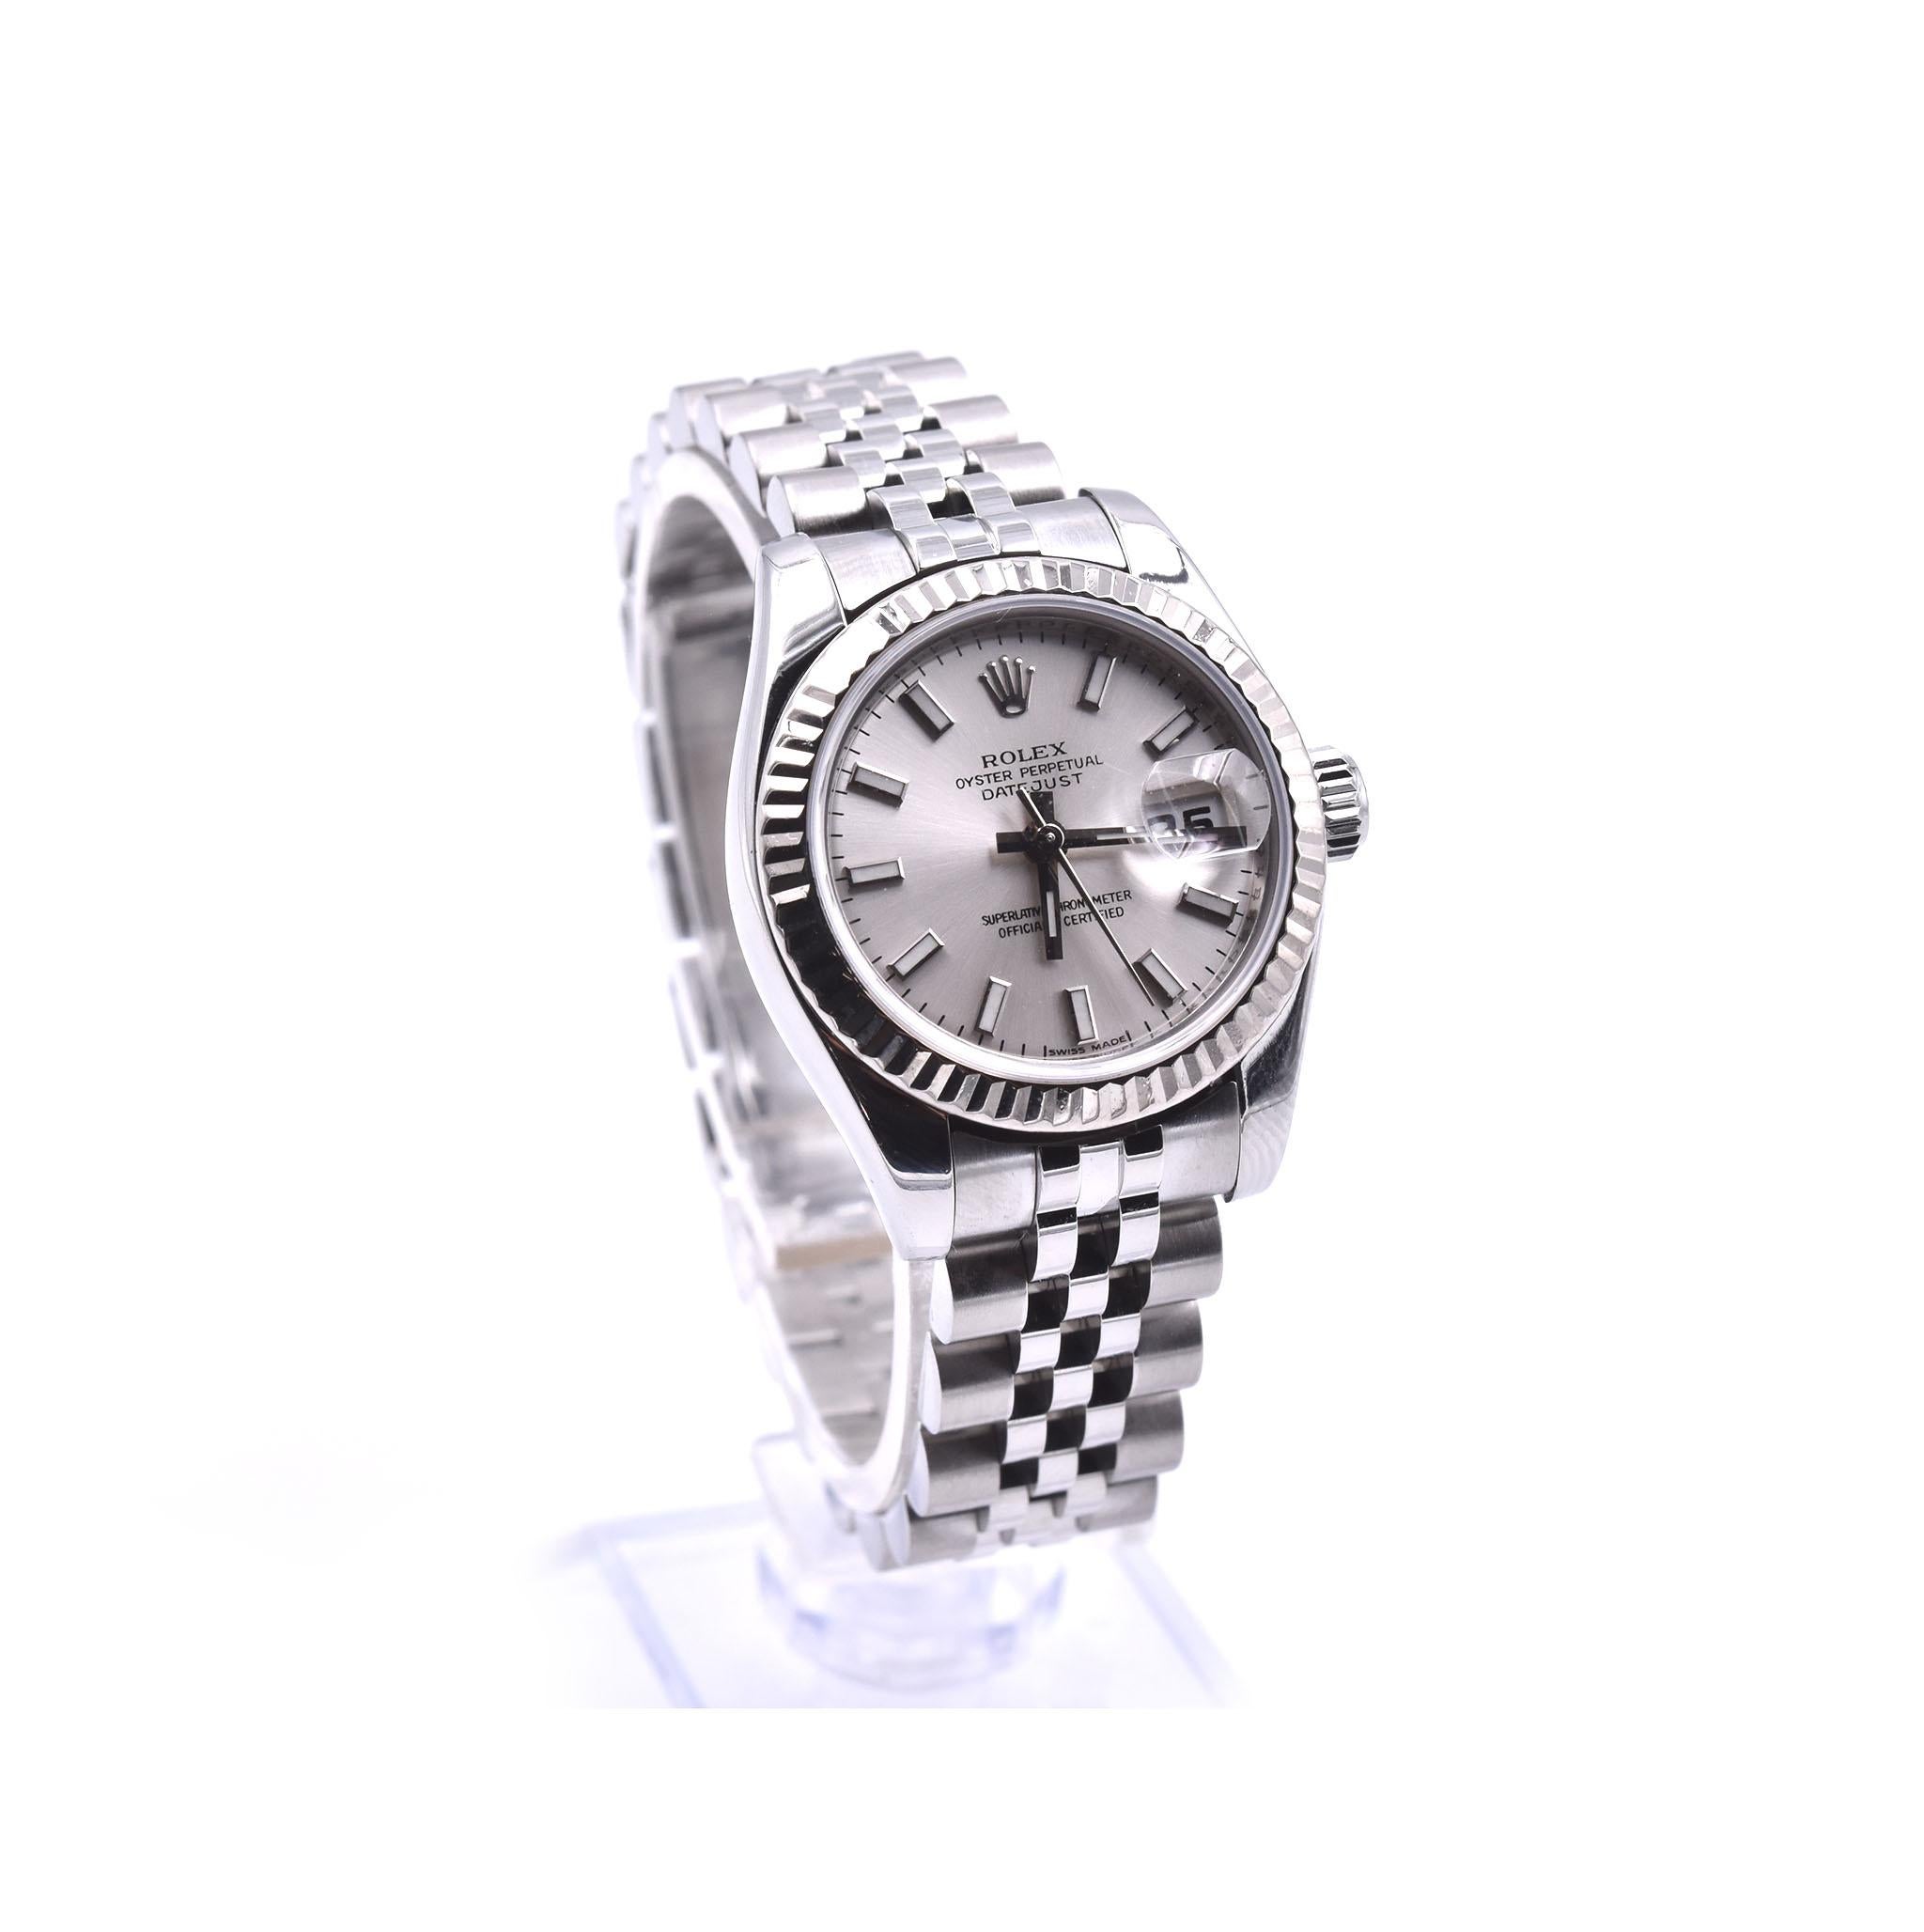 Movement: automatic 
Function: hours, minutes, seconds, date
Case: round 26mm stainless steel case with 18k white gold fluted bezel, sapphire protective crystal, screw-down crown, water resistant to 100 meters
Band: stainless steel jubilee bracelet